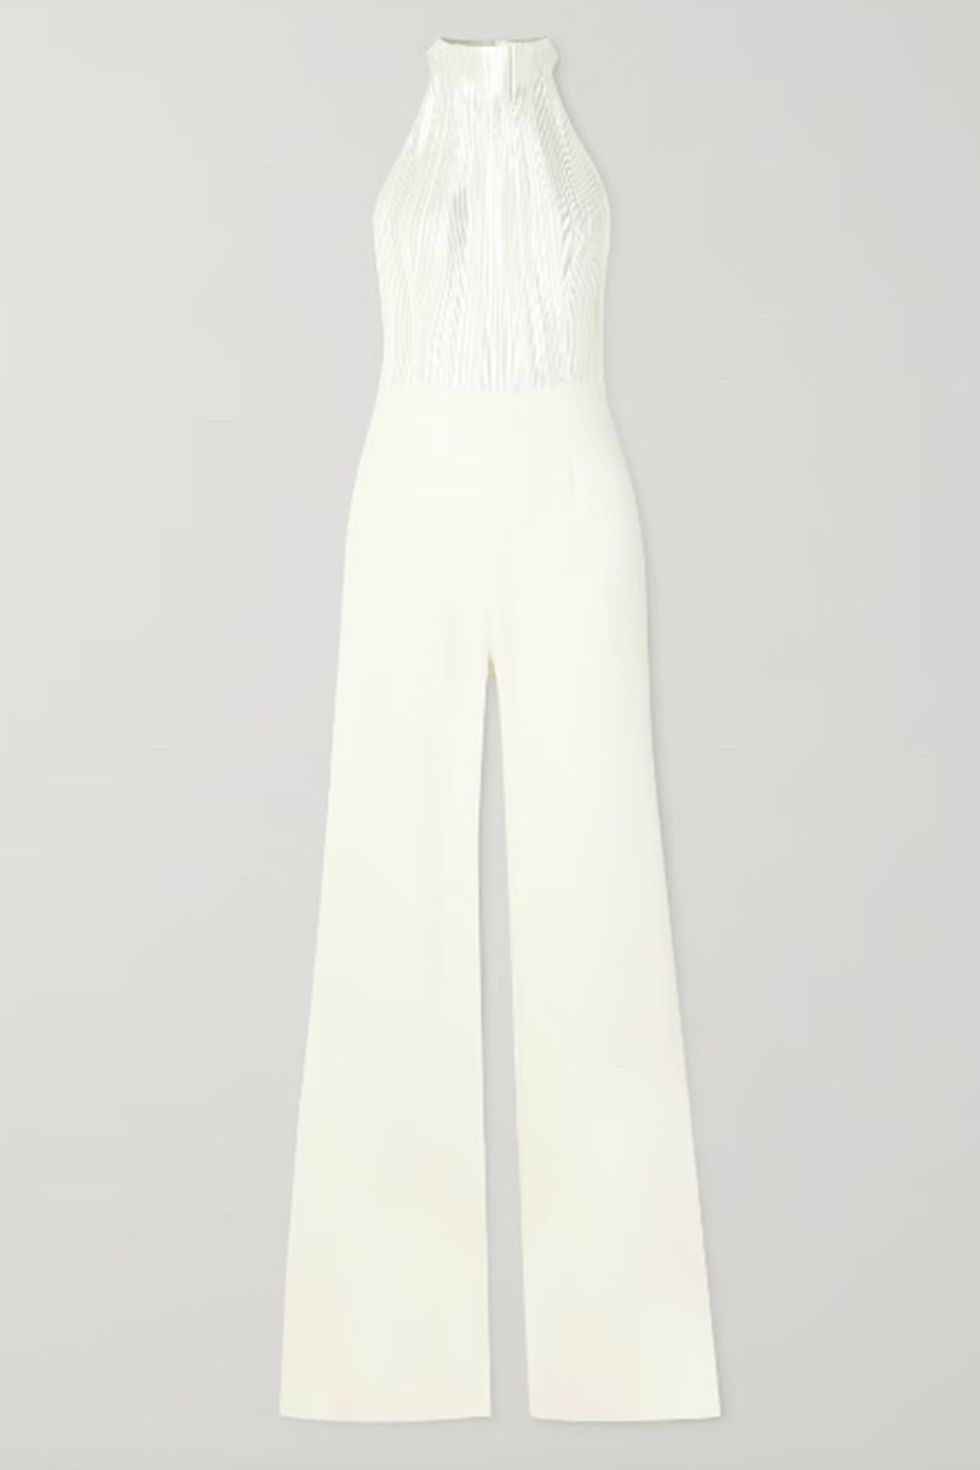 Best jumpsuits for weddings - designer jumpsuits to buy now